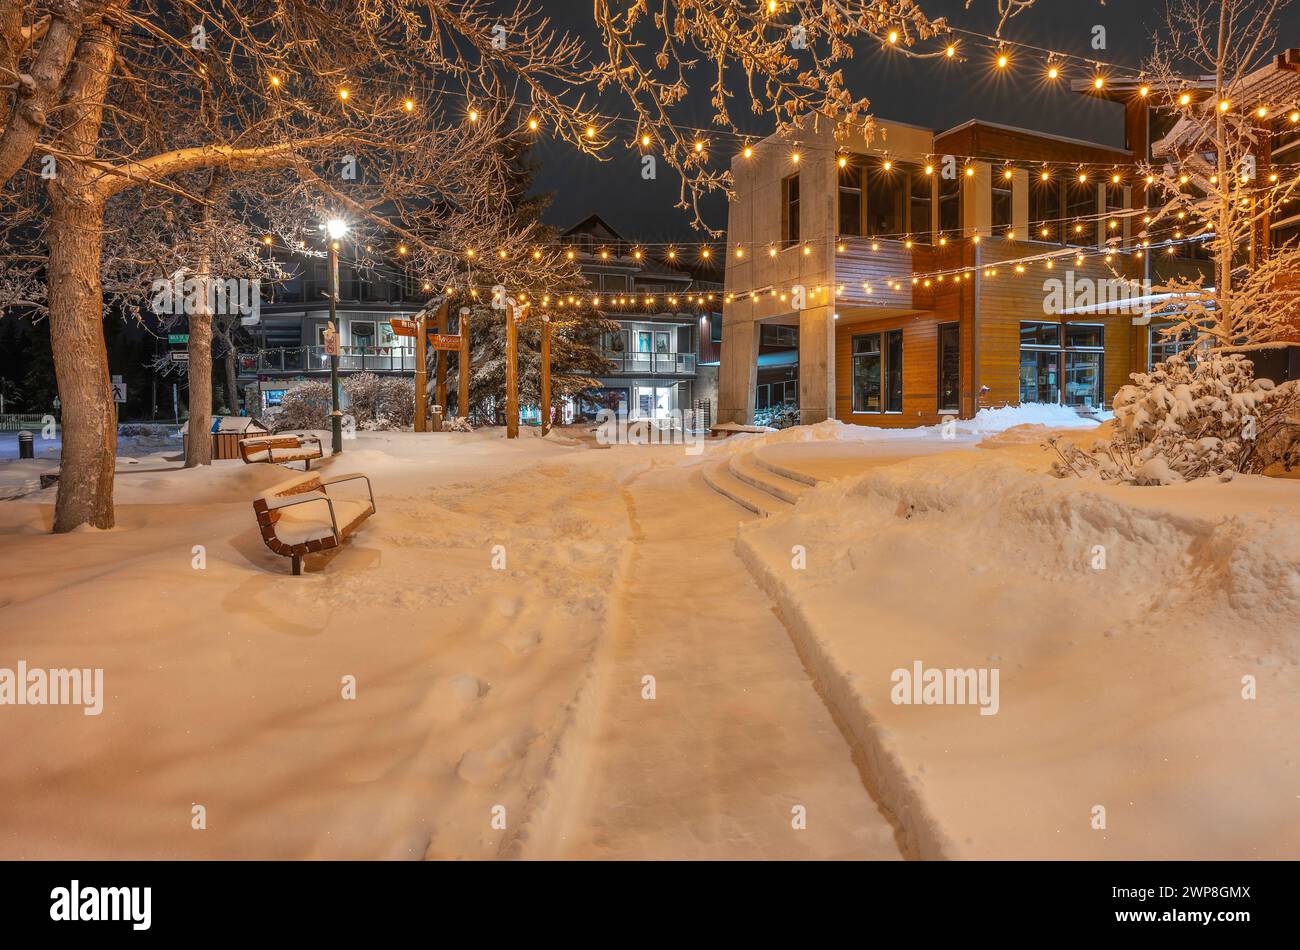 Night view of snow-covered Civic Plaza benches in downtown Canmore, Alberta, Canada Stock Photo